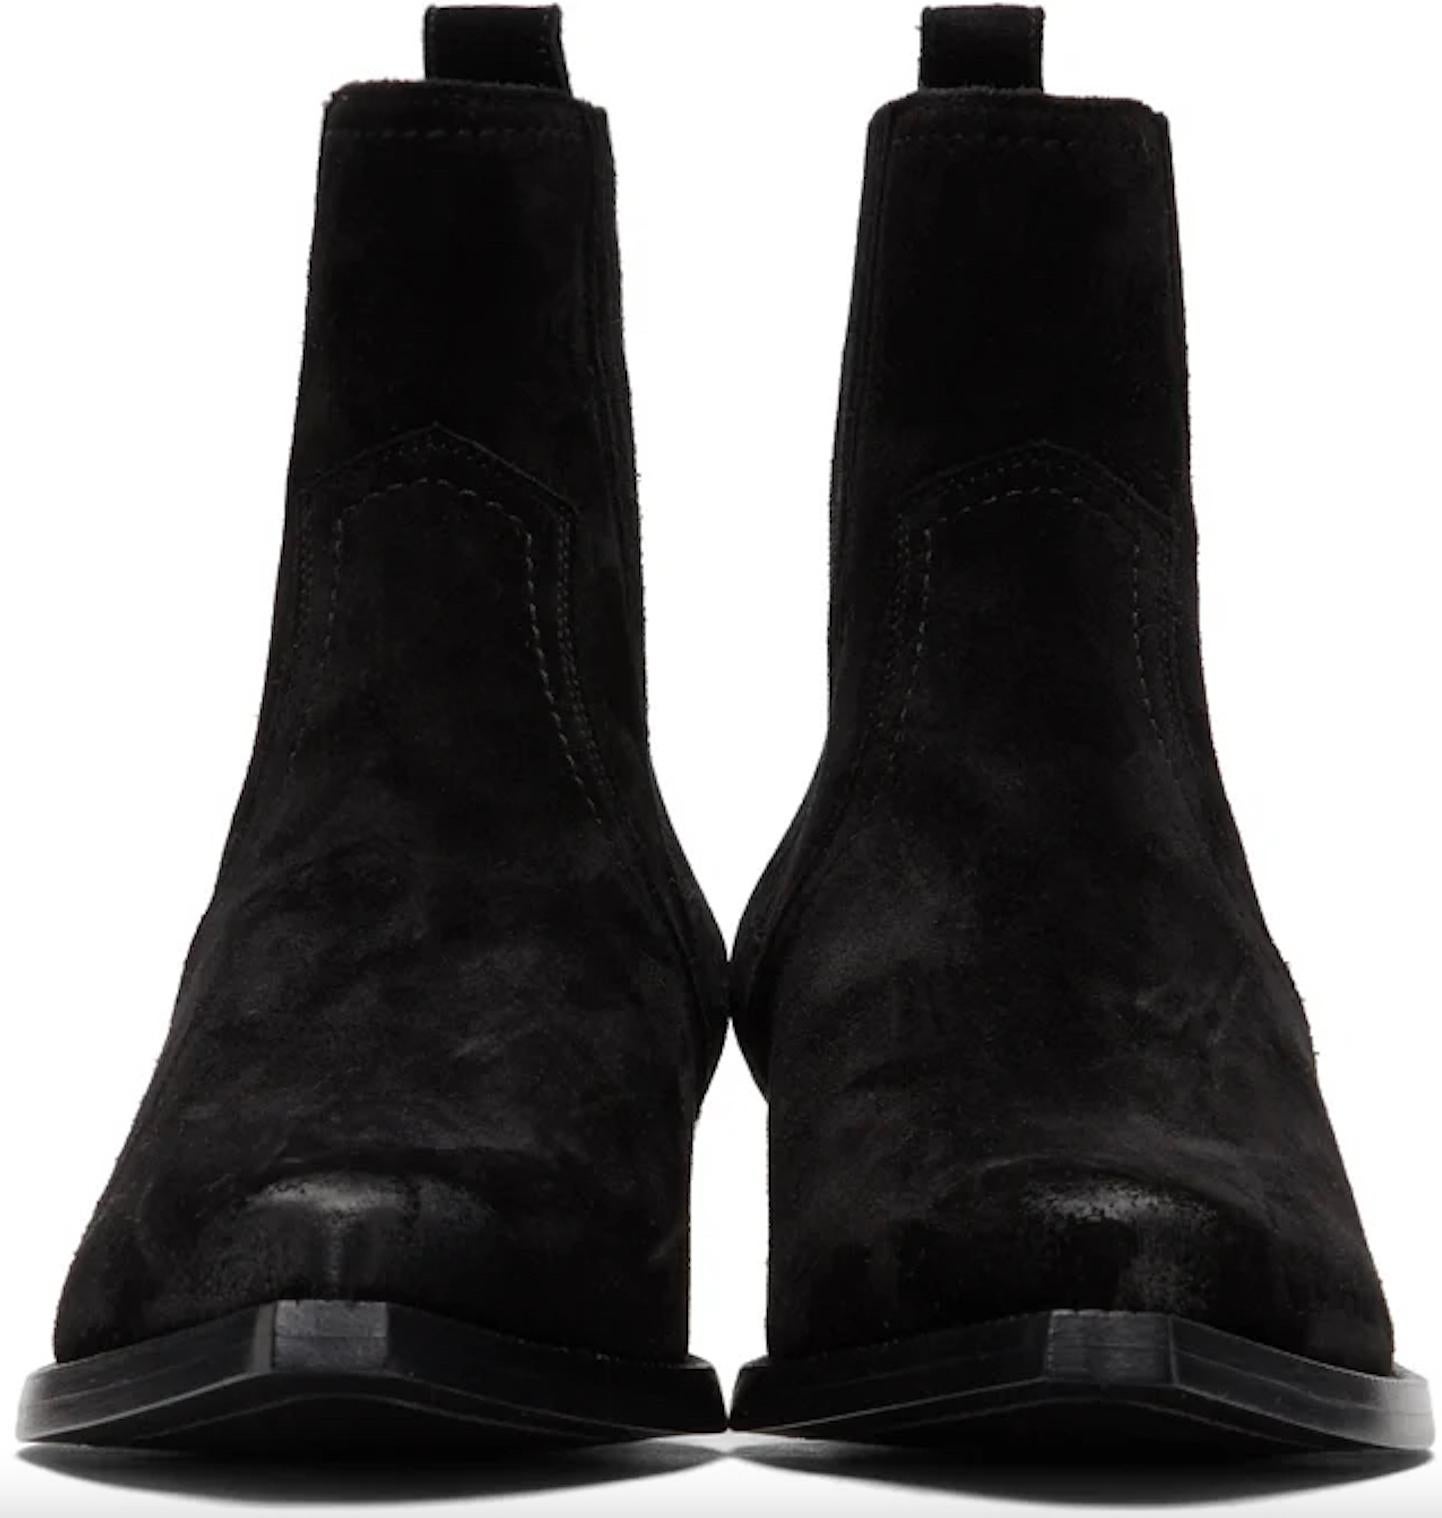 Saint Laurent Mens Black Suede Lukas 40 Chelsea Boots

Fashion on the front lines. These Lukas ankle boots from Saint Laurent are reporting for (stylish) duty. And whether they see action or they just see the inside of a shopping center - there's no